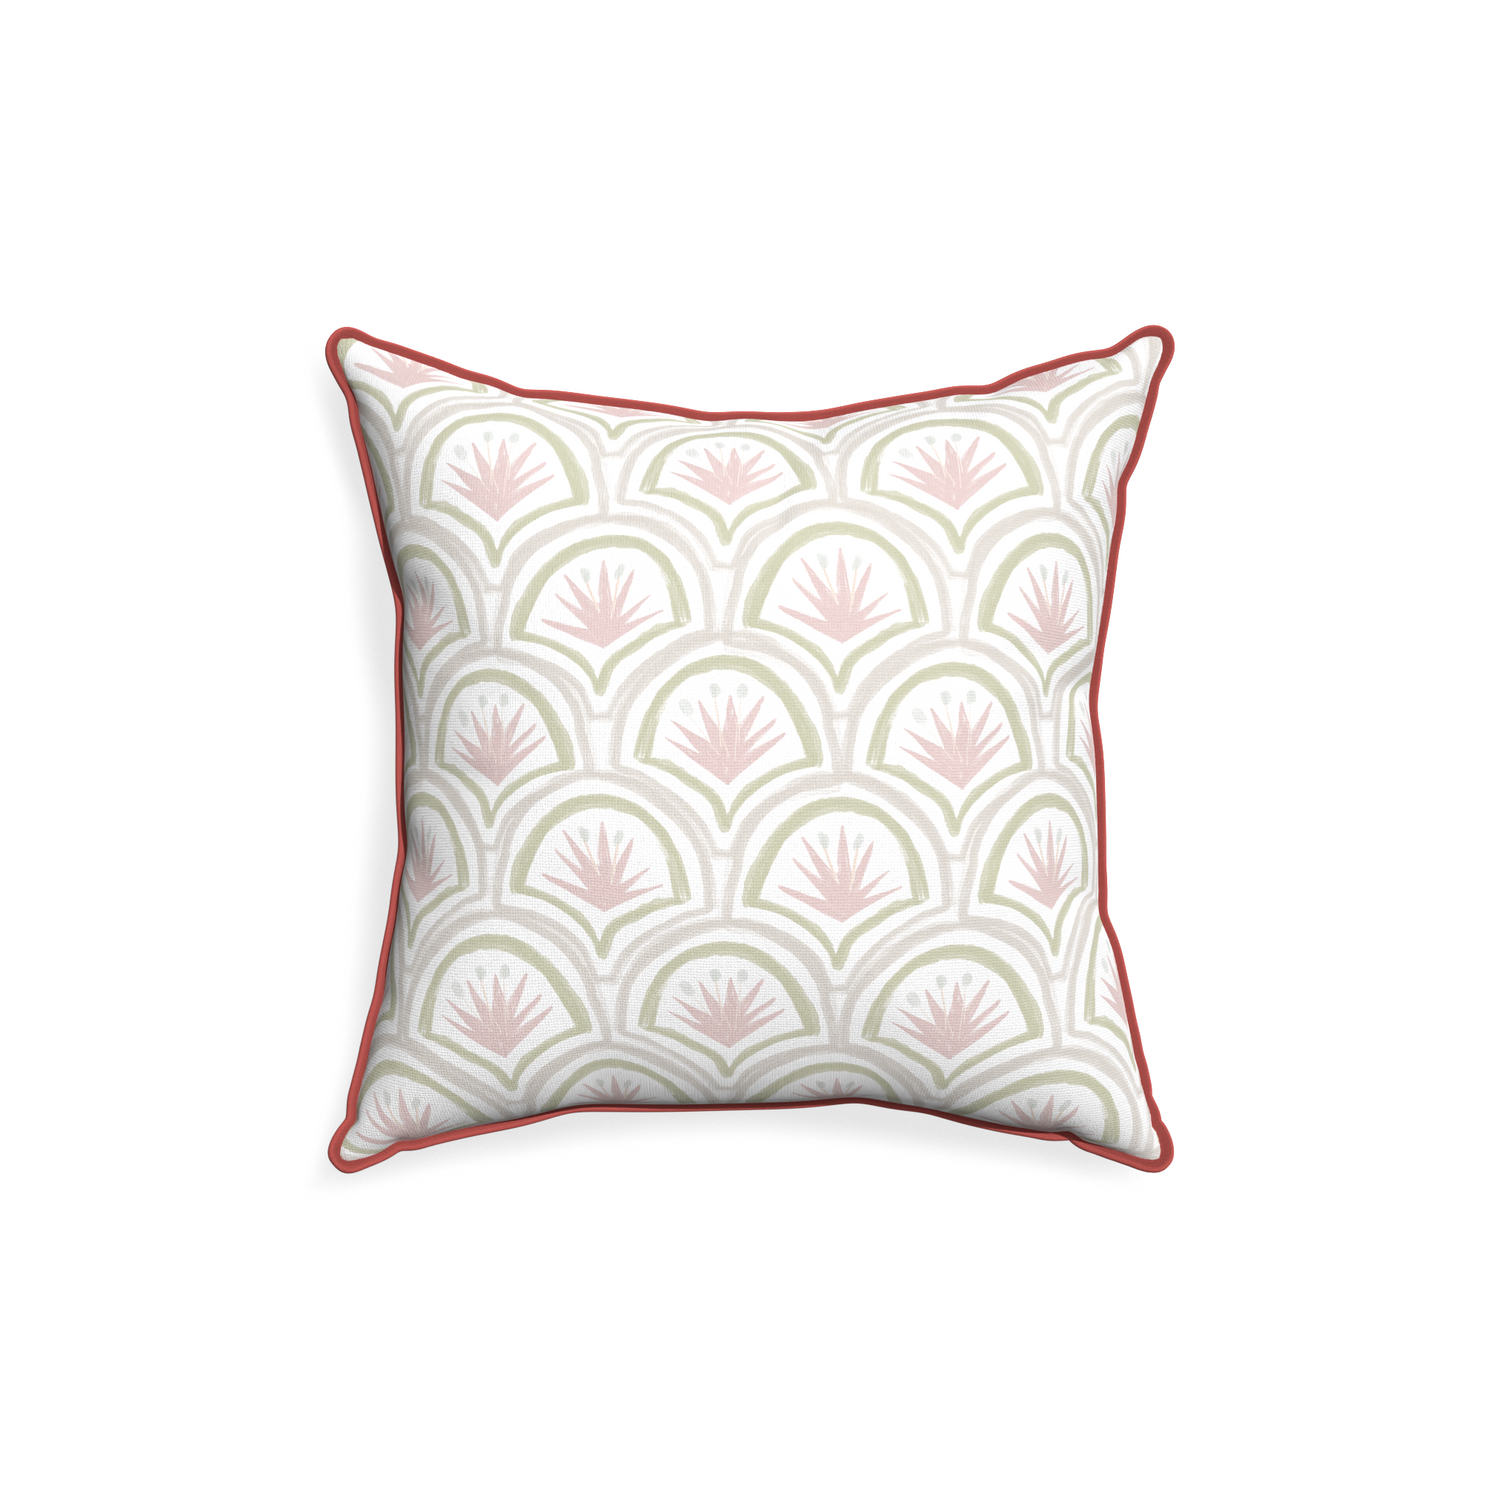 18-square thatcher rose custom pillow with c piping on white background